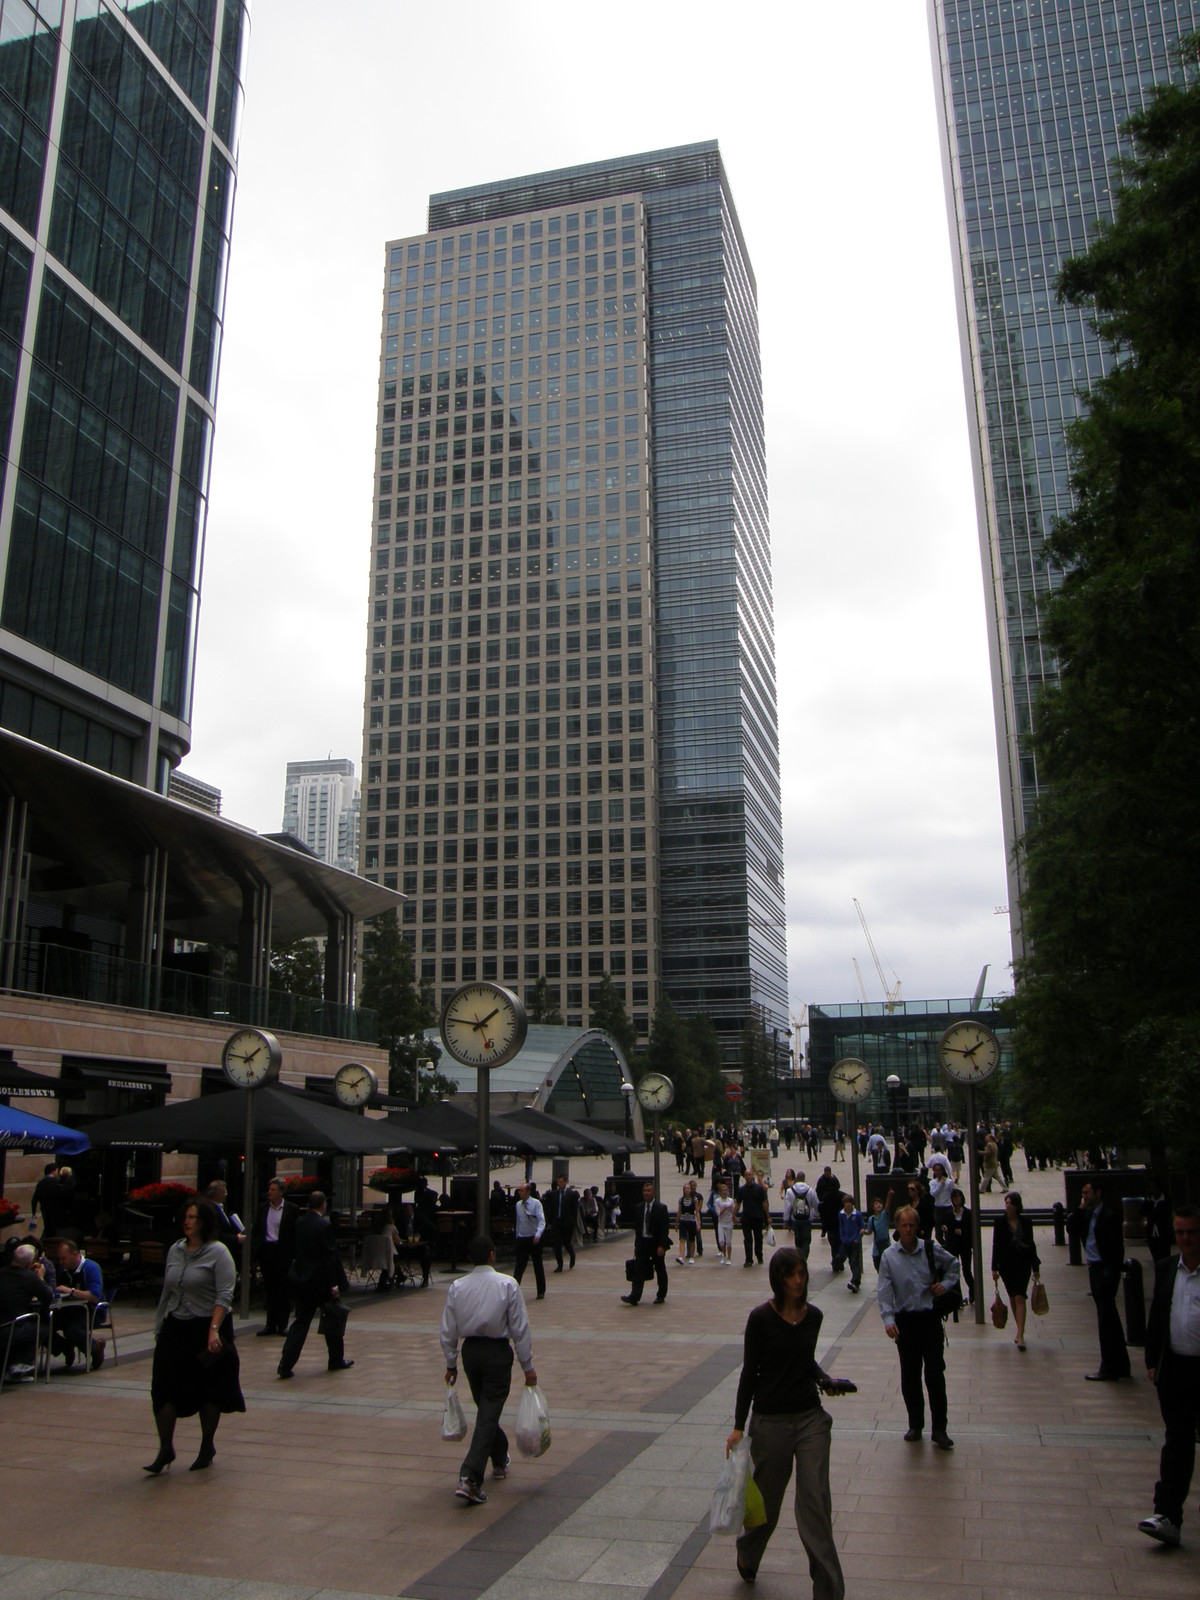 The square outside Canary Wharf station, as seen from the north